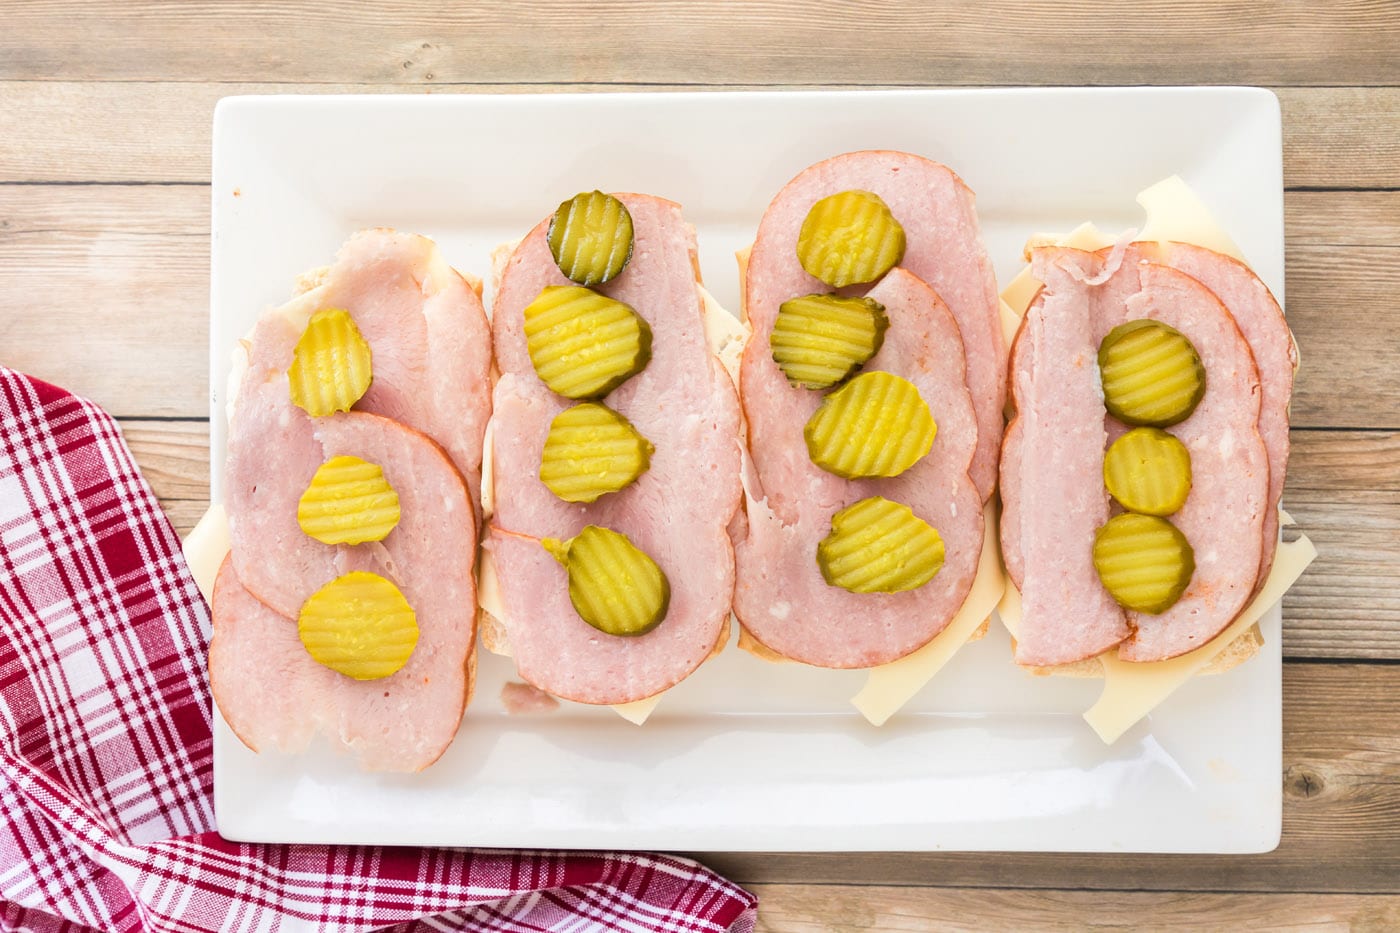 Pickle rounds on top of ham and Swiss cheese for Cubano